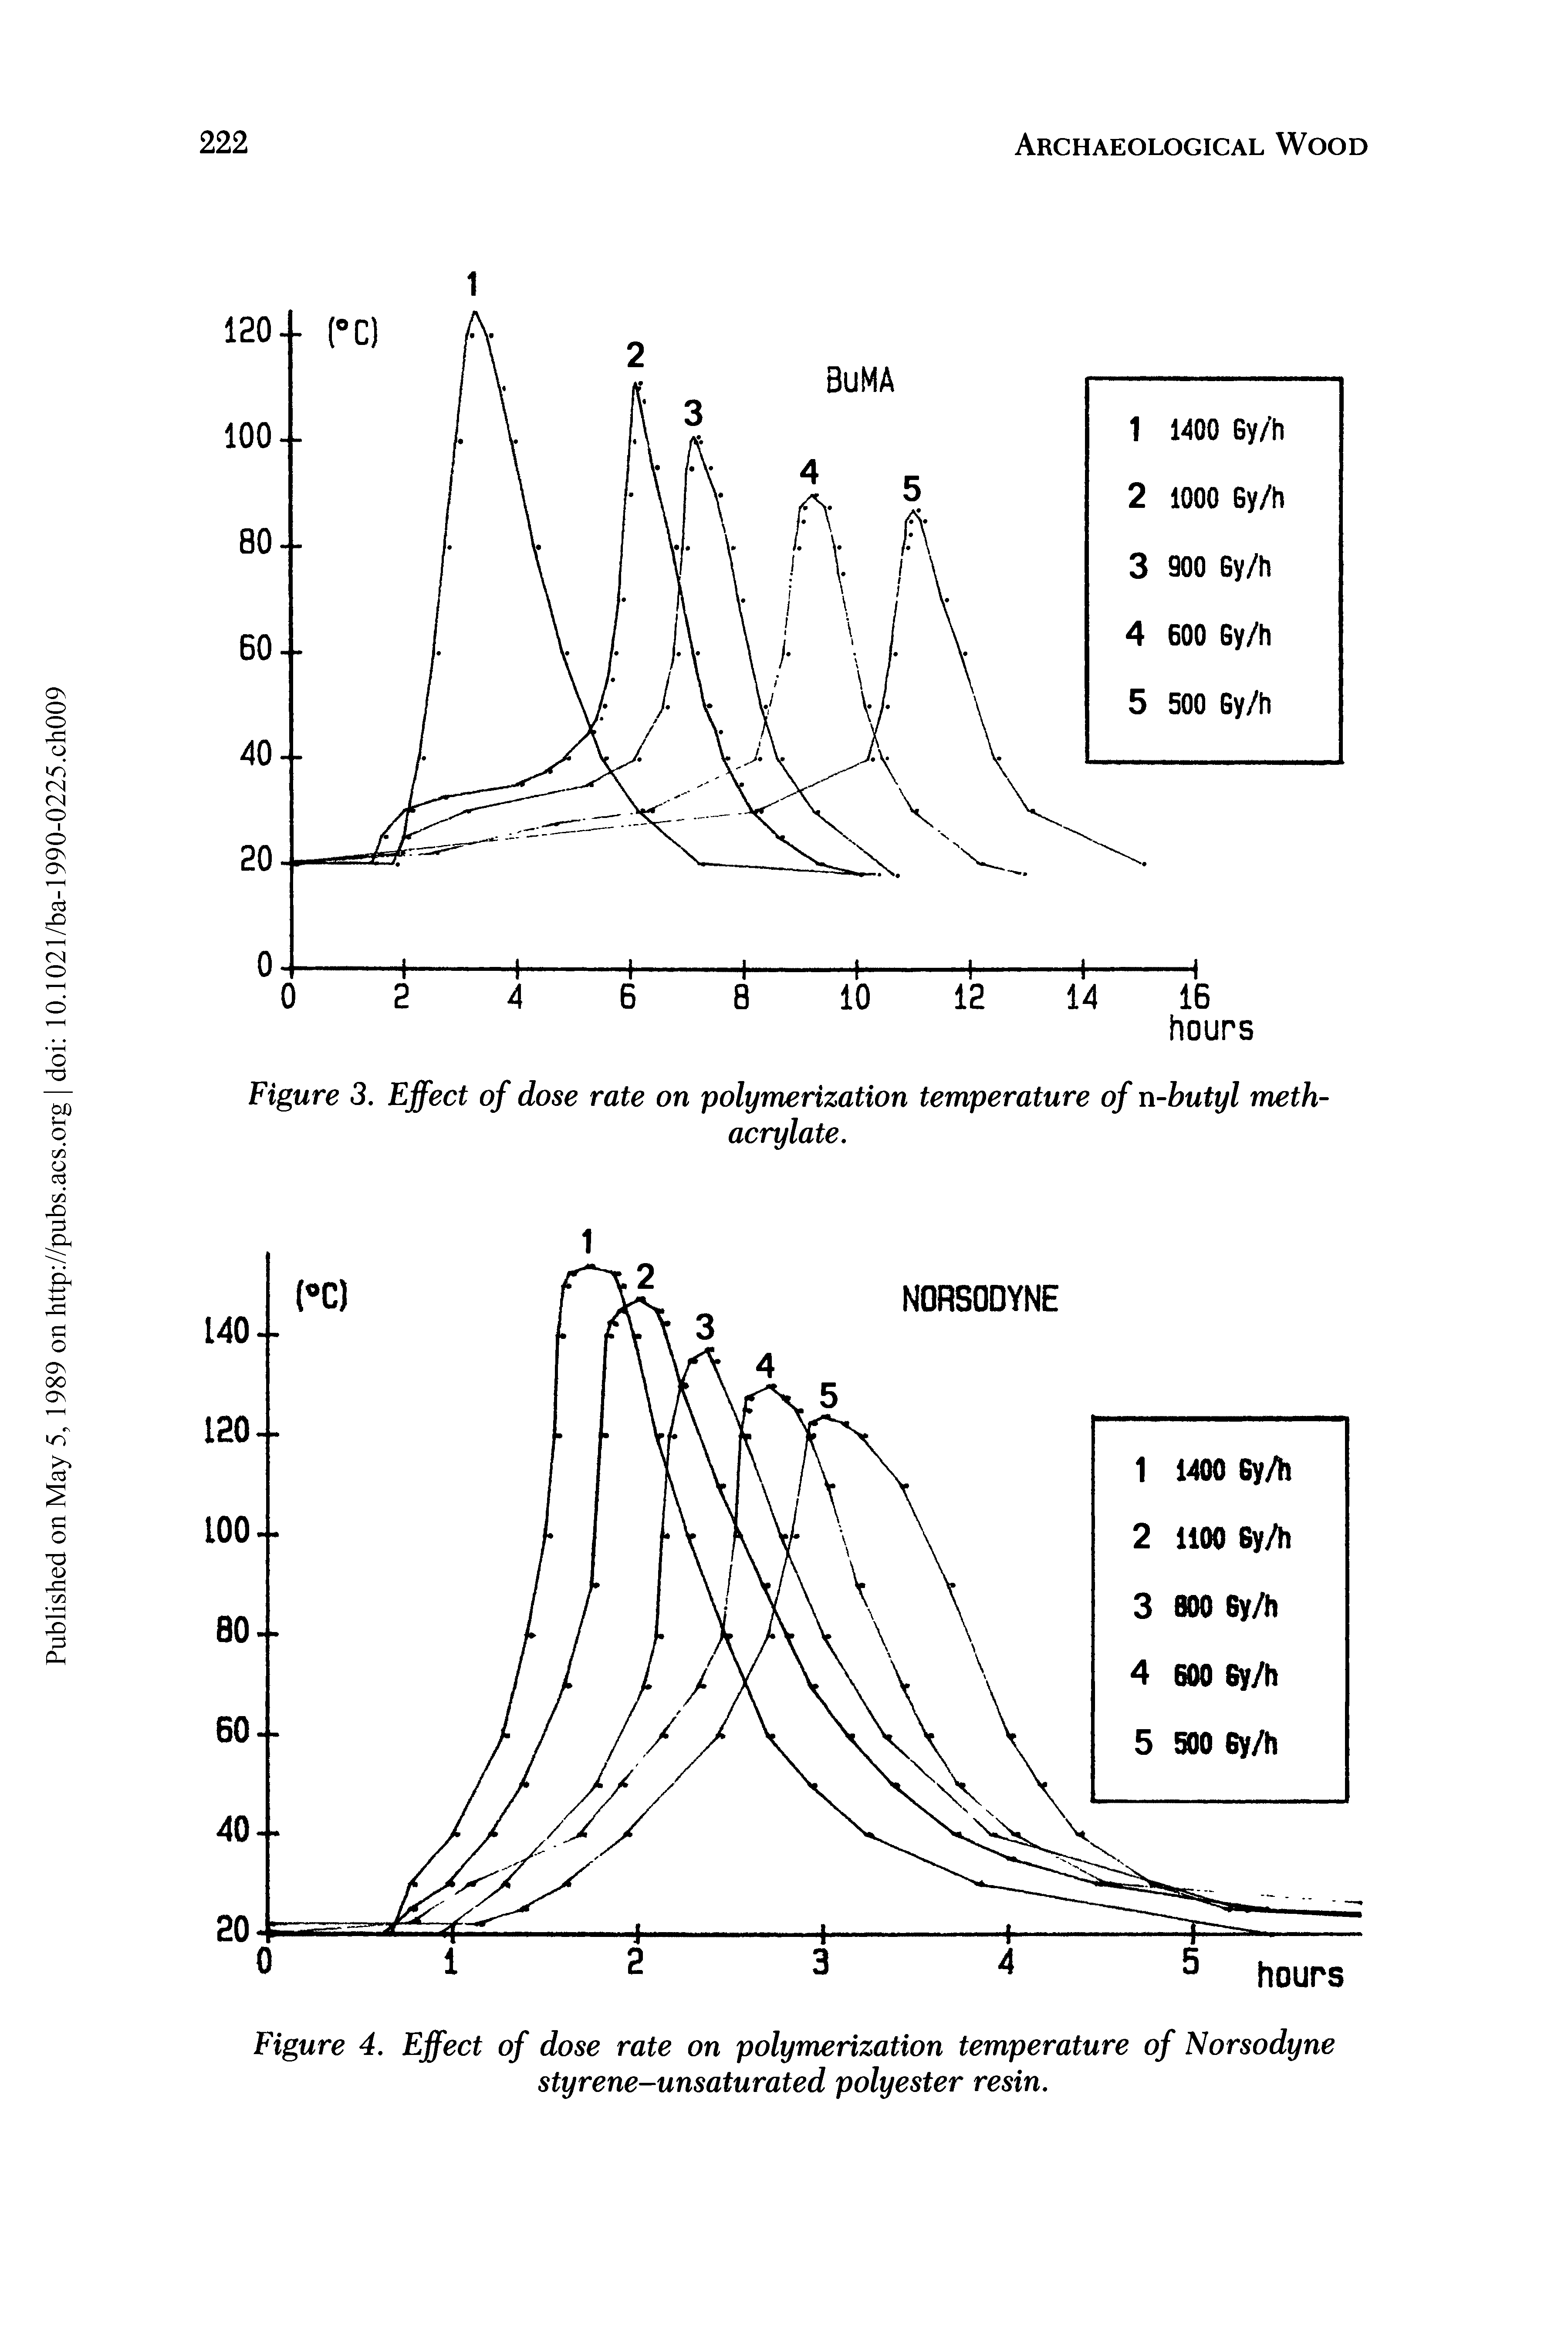 Figure 4. Effect of dose rate on polymerization temperature of Norsodyne styrene-unsaturated polyester resin.